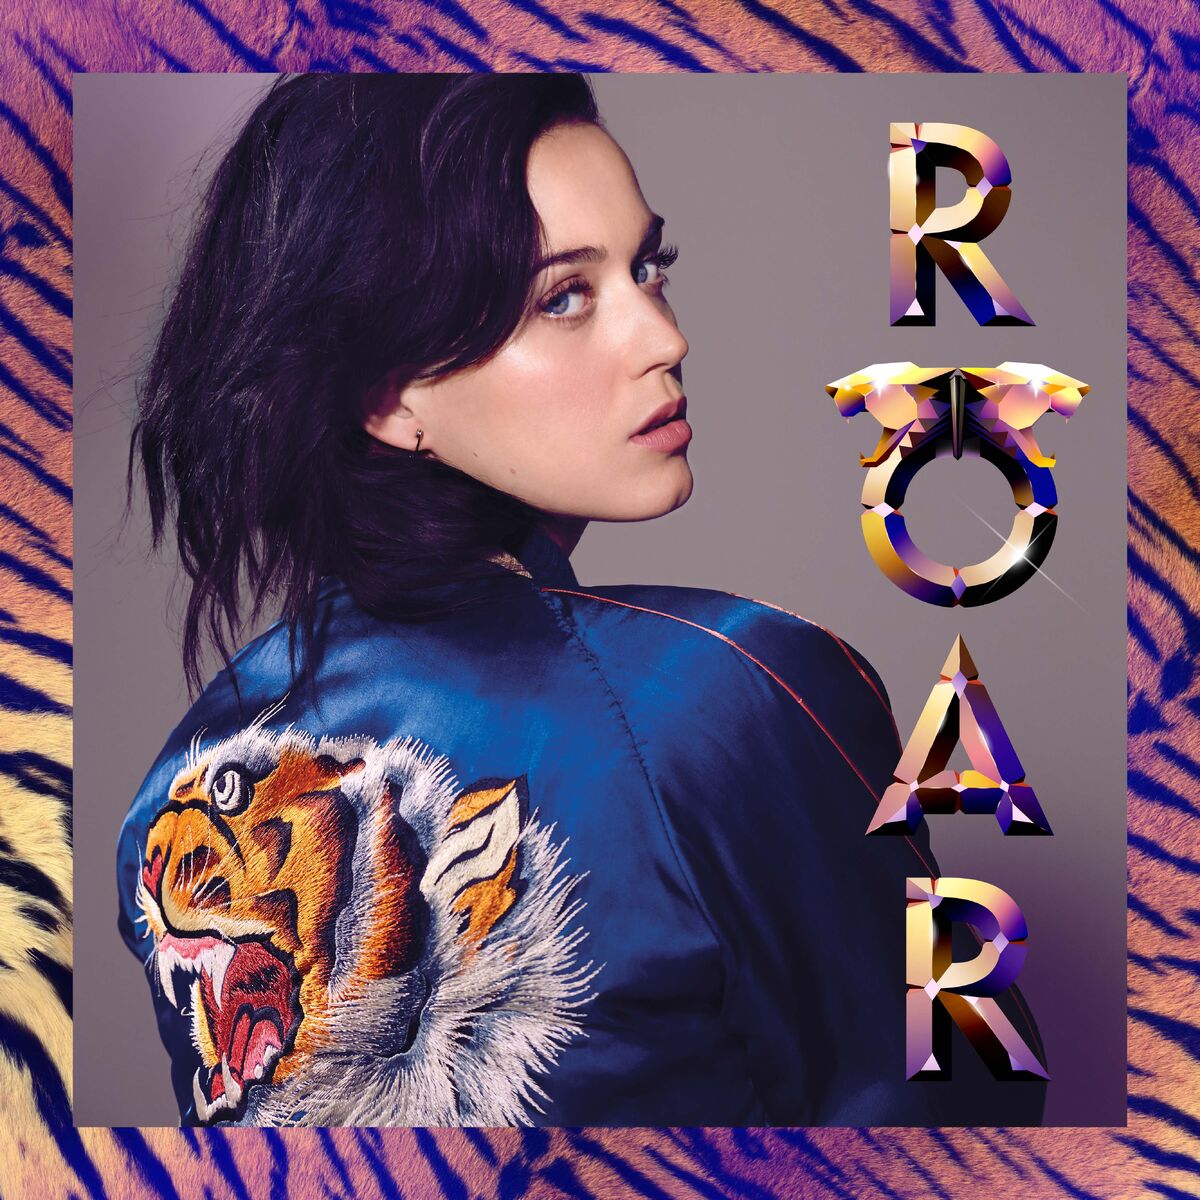 Roar Katy Perry - cover by Bella with Lyrics and Actions